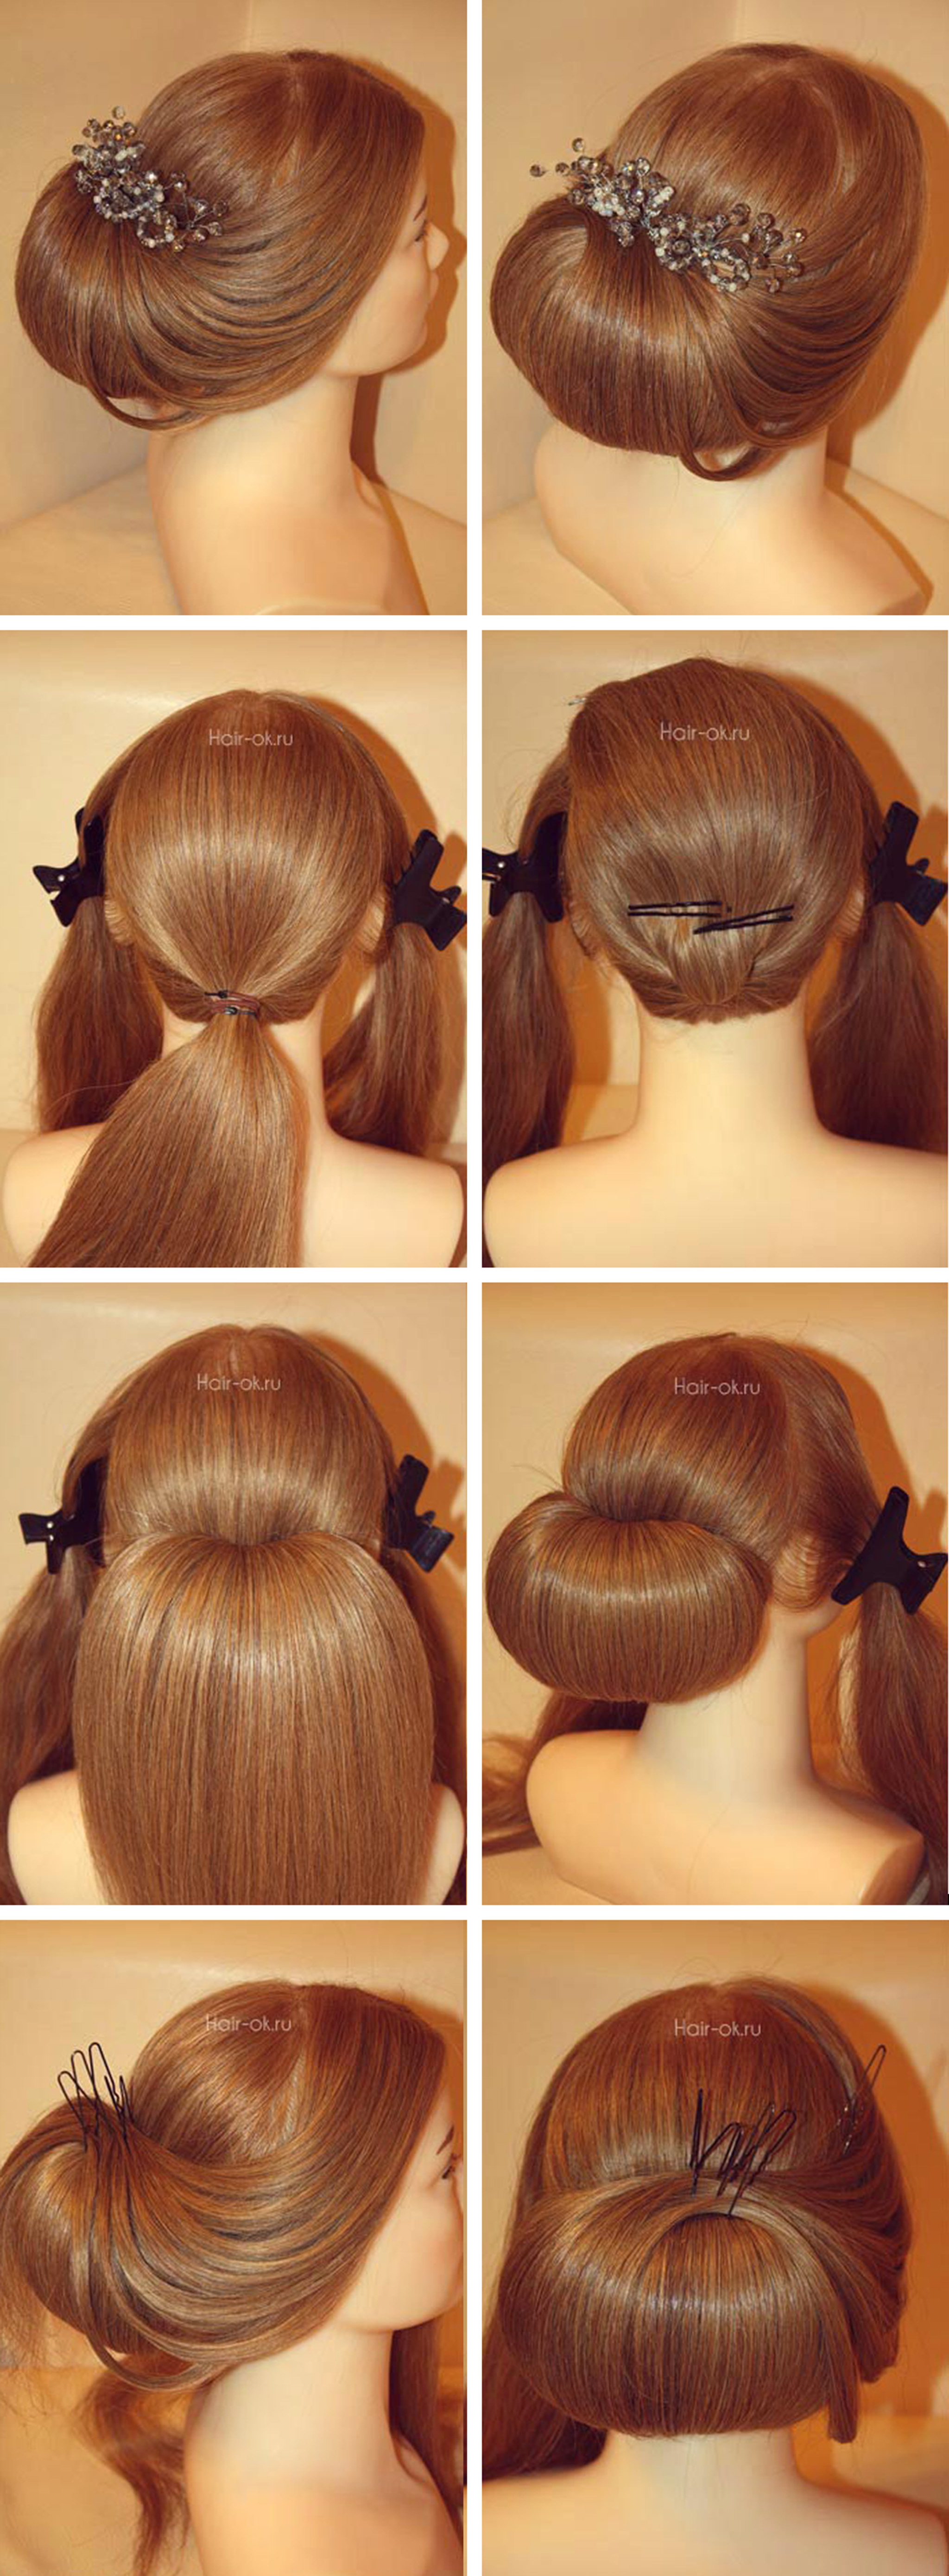 10+ Easy & Quick Hairstyles For Parties – Step By Step ...